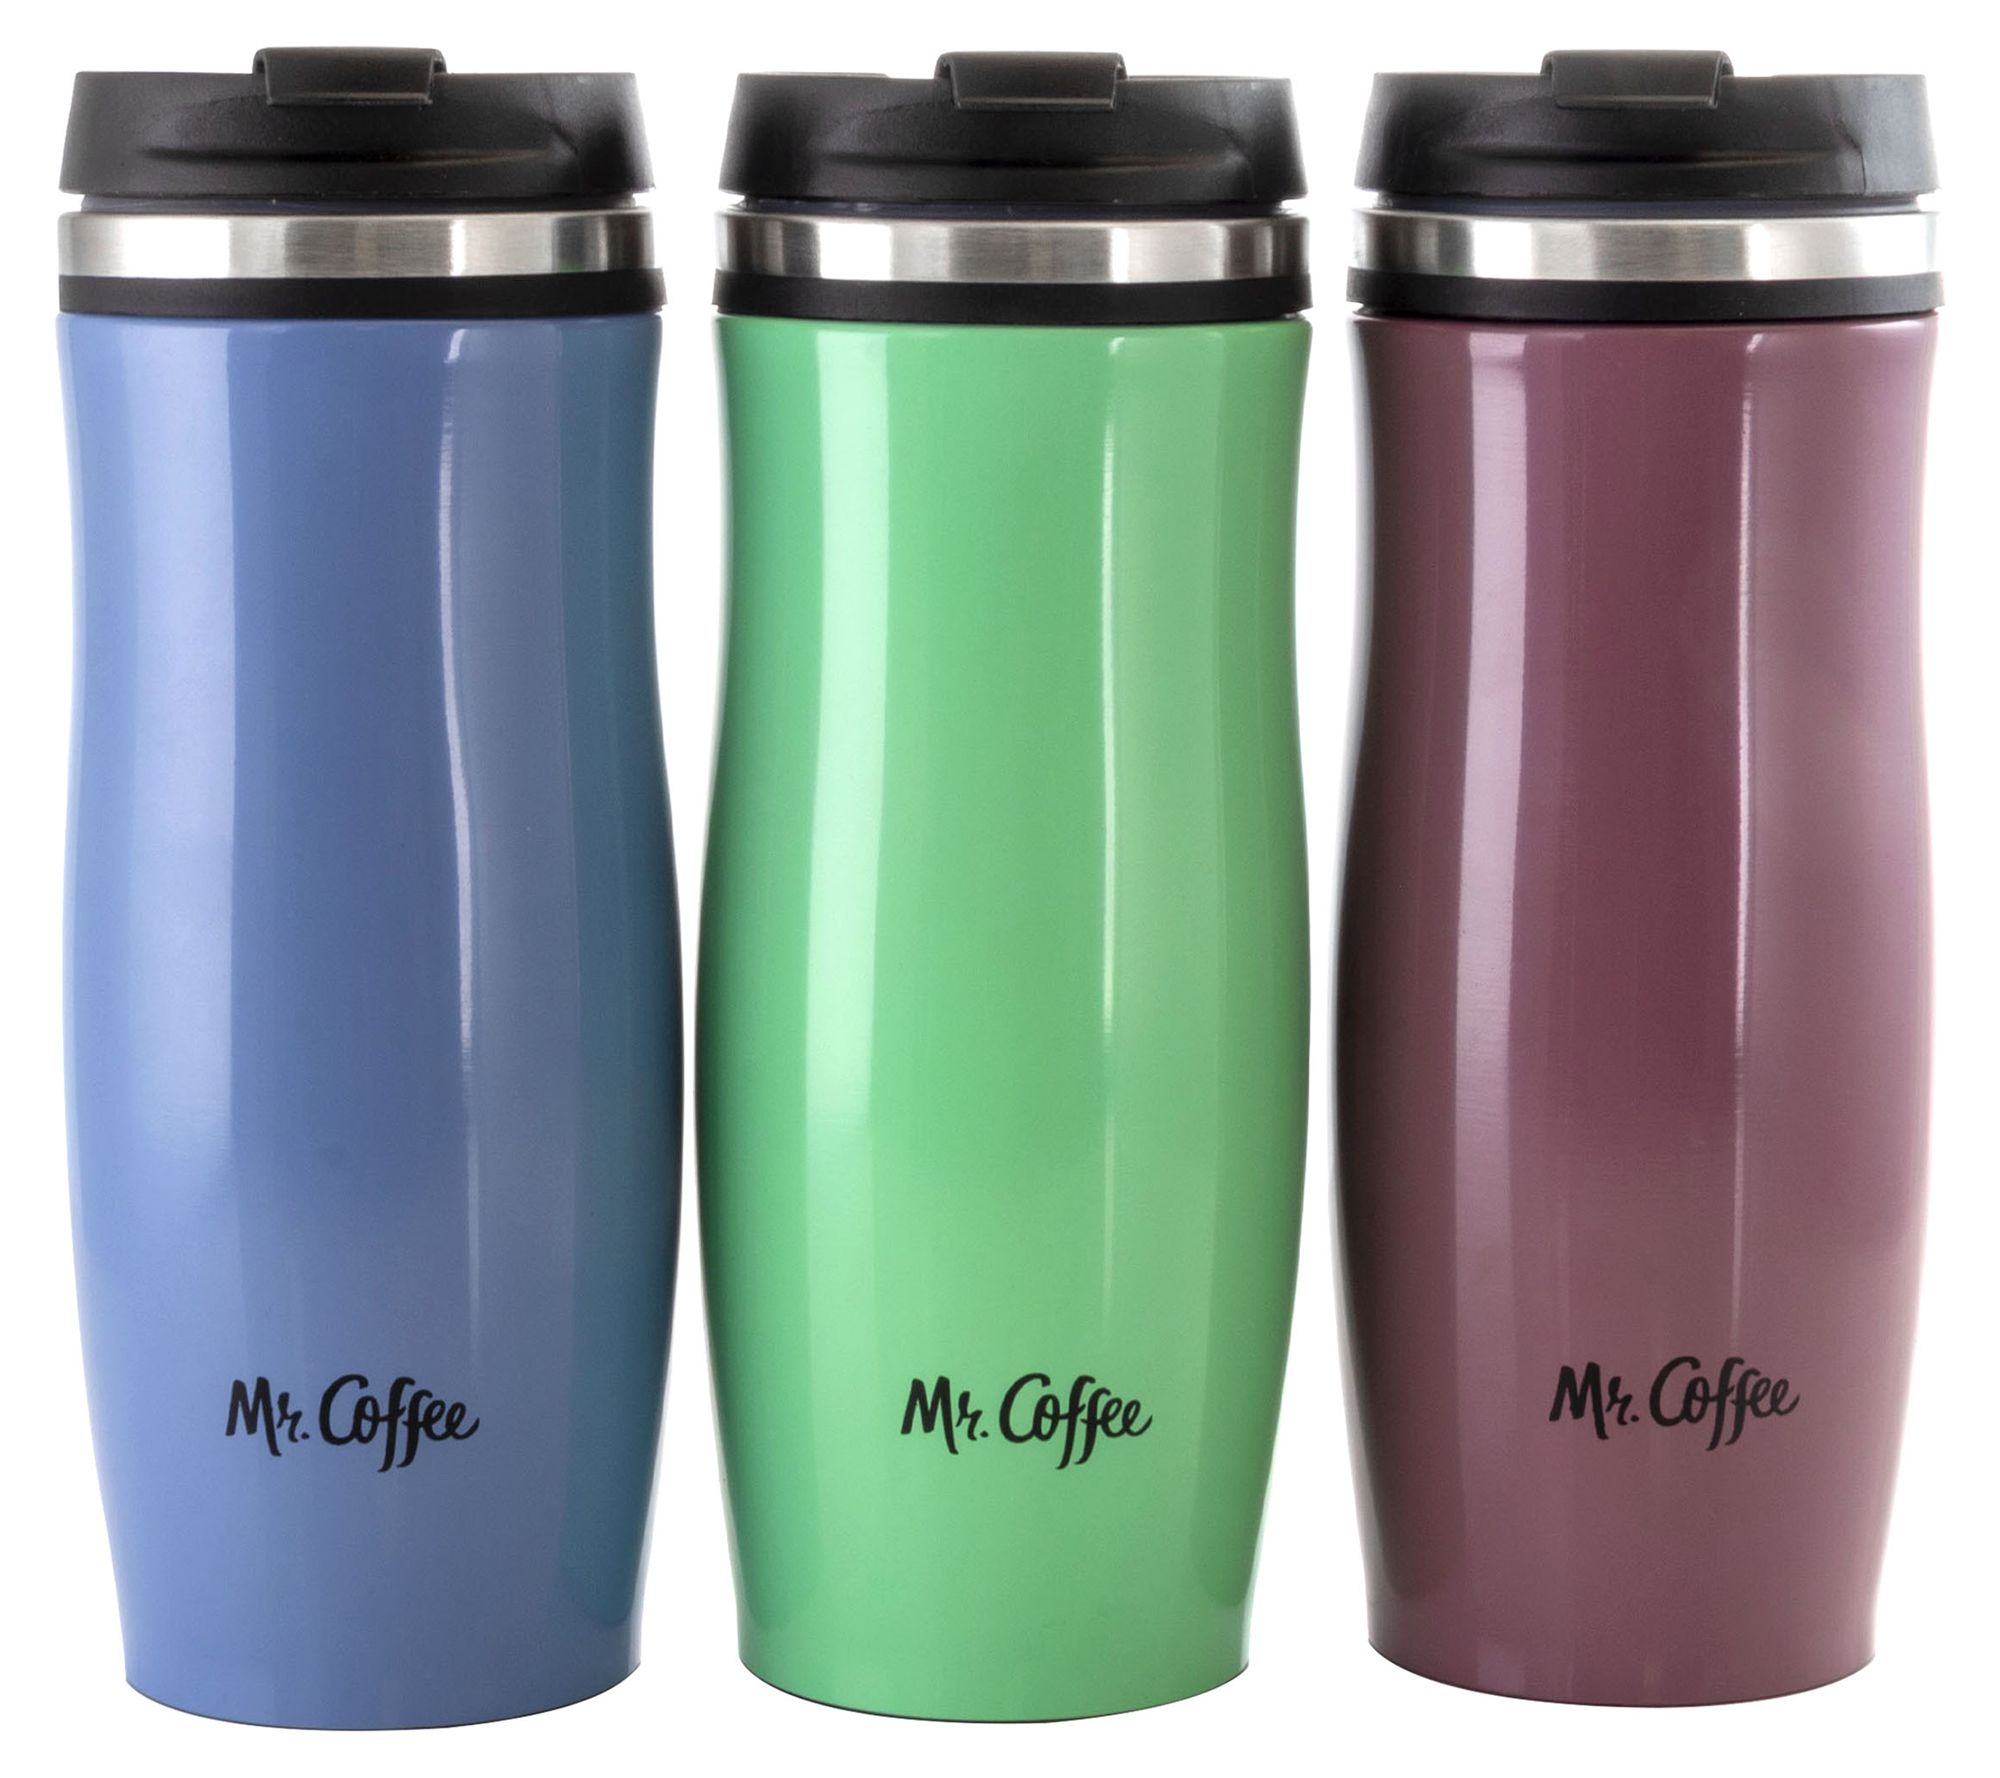 SKATER Kids thermos with Cup for boys - buy online from Japan